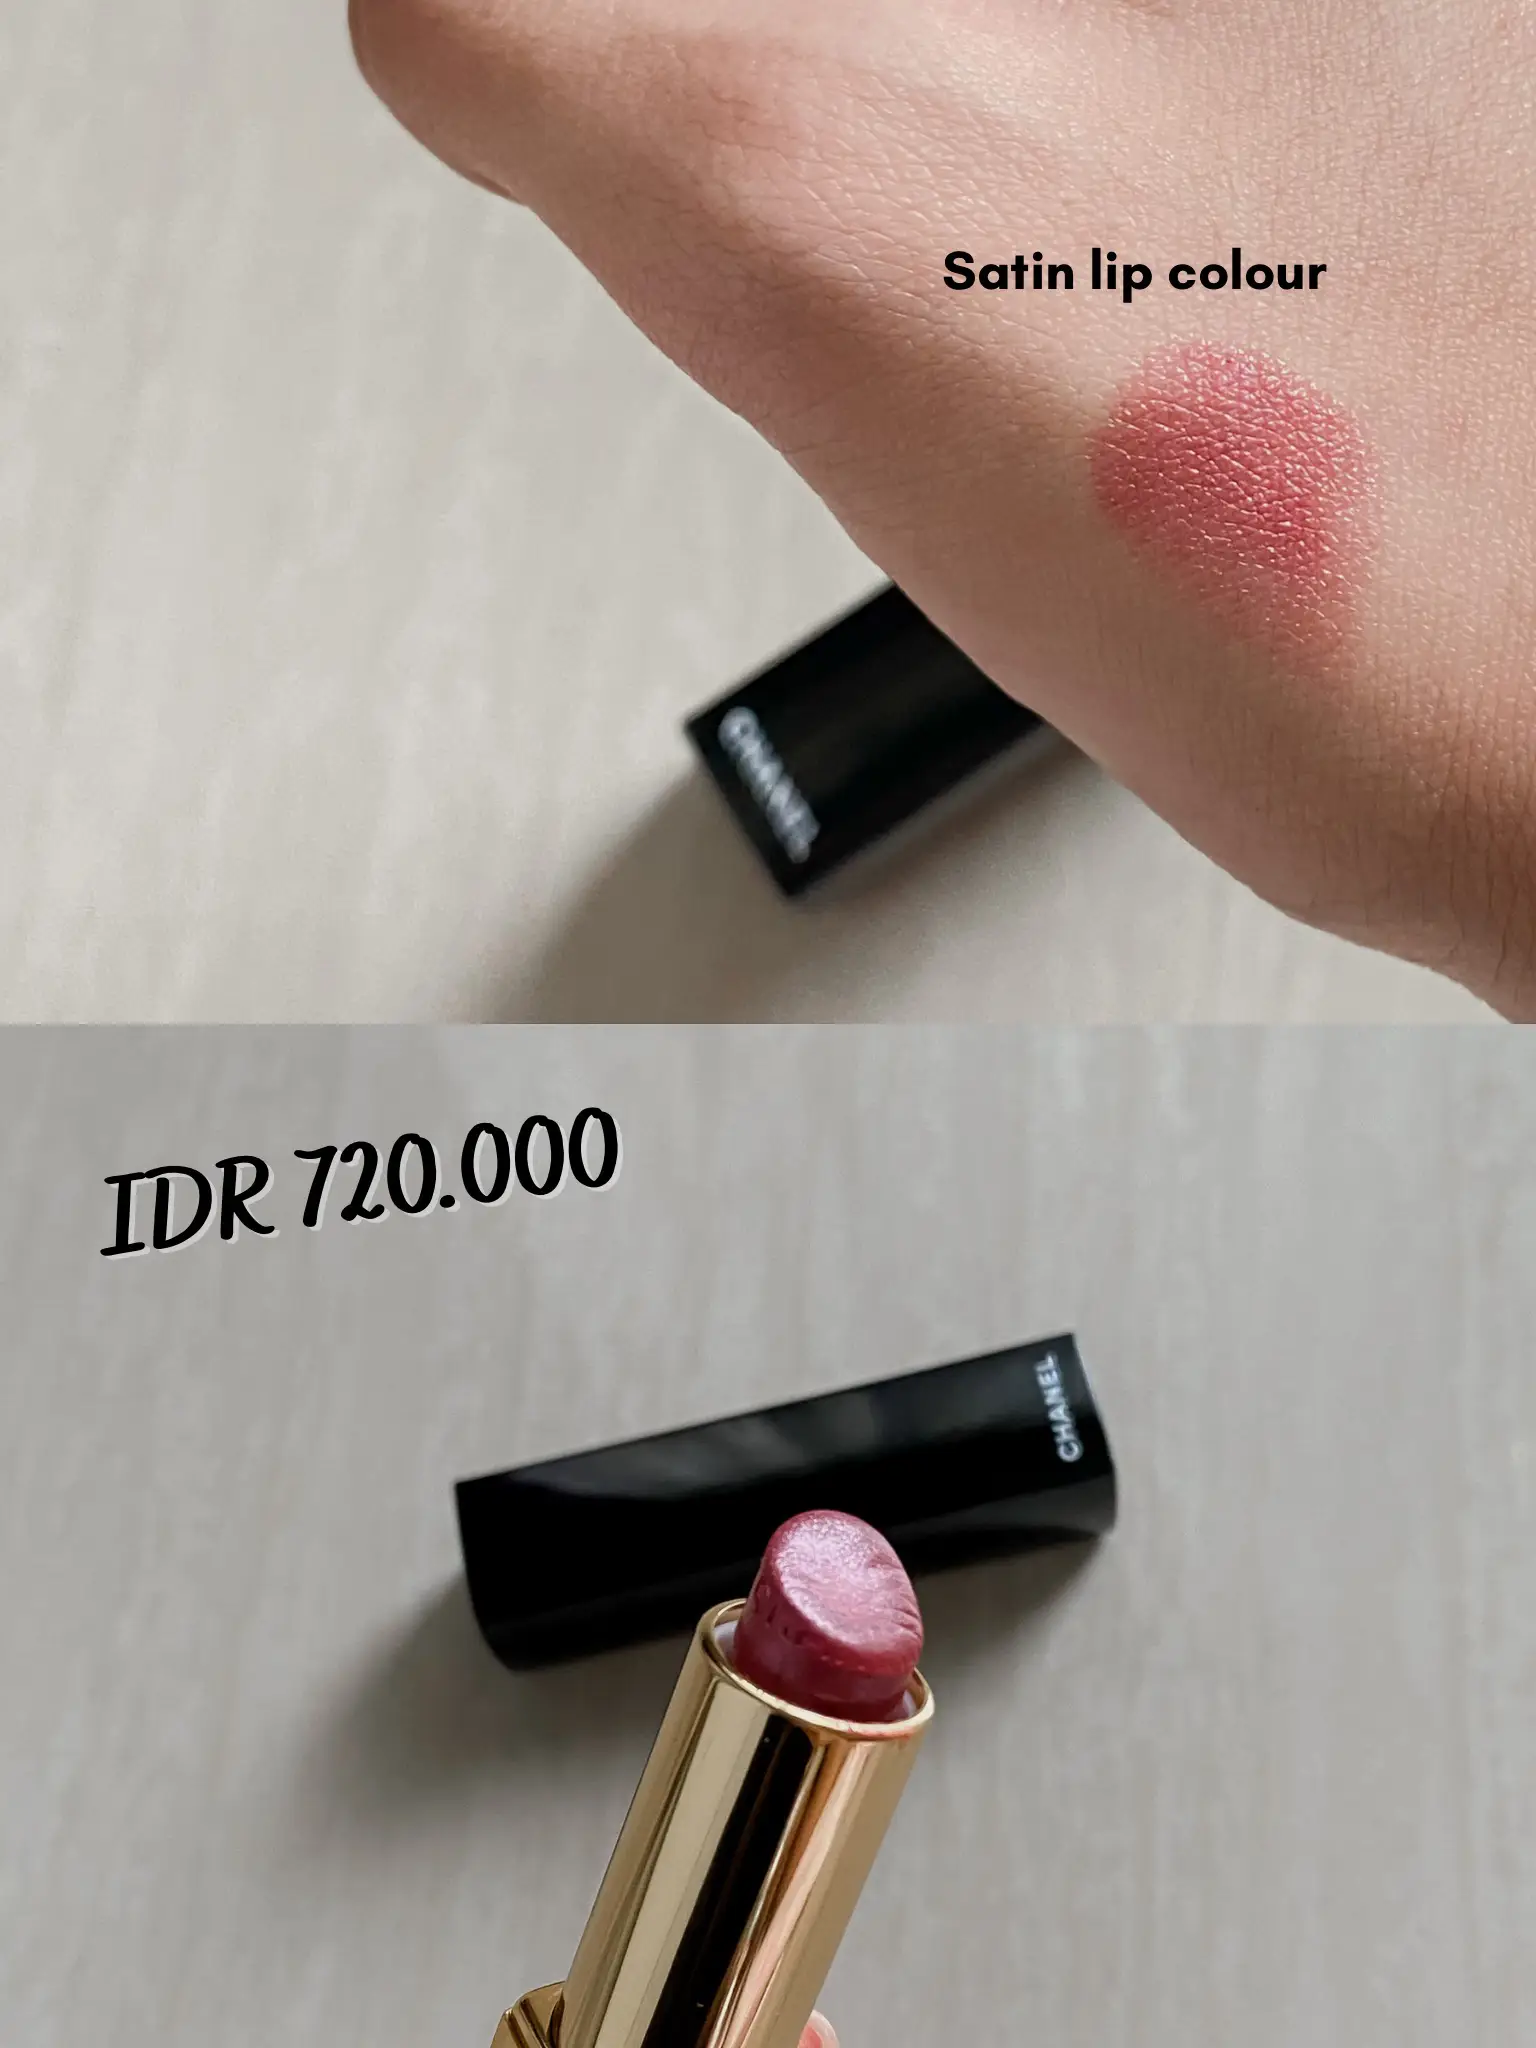 REVIEW LIPSTICK CHANEL💄💋, Gallery posted by dhieava